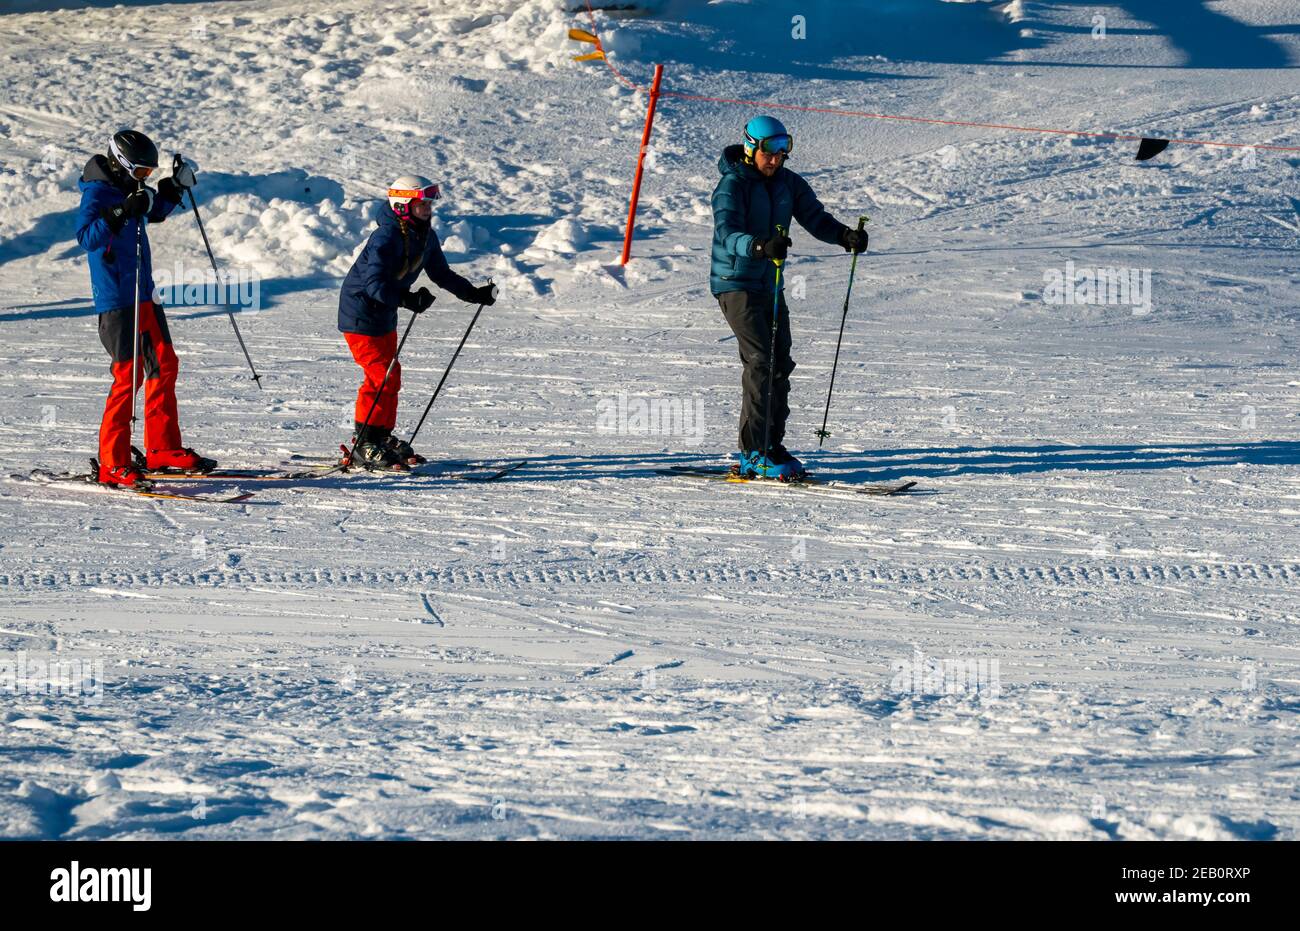 Family skiing down a slope at a alpine ski resort. Stock Photo